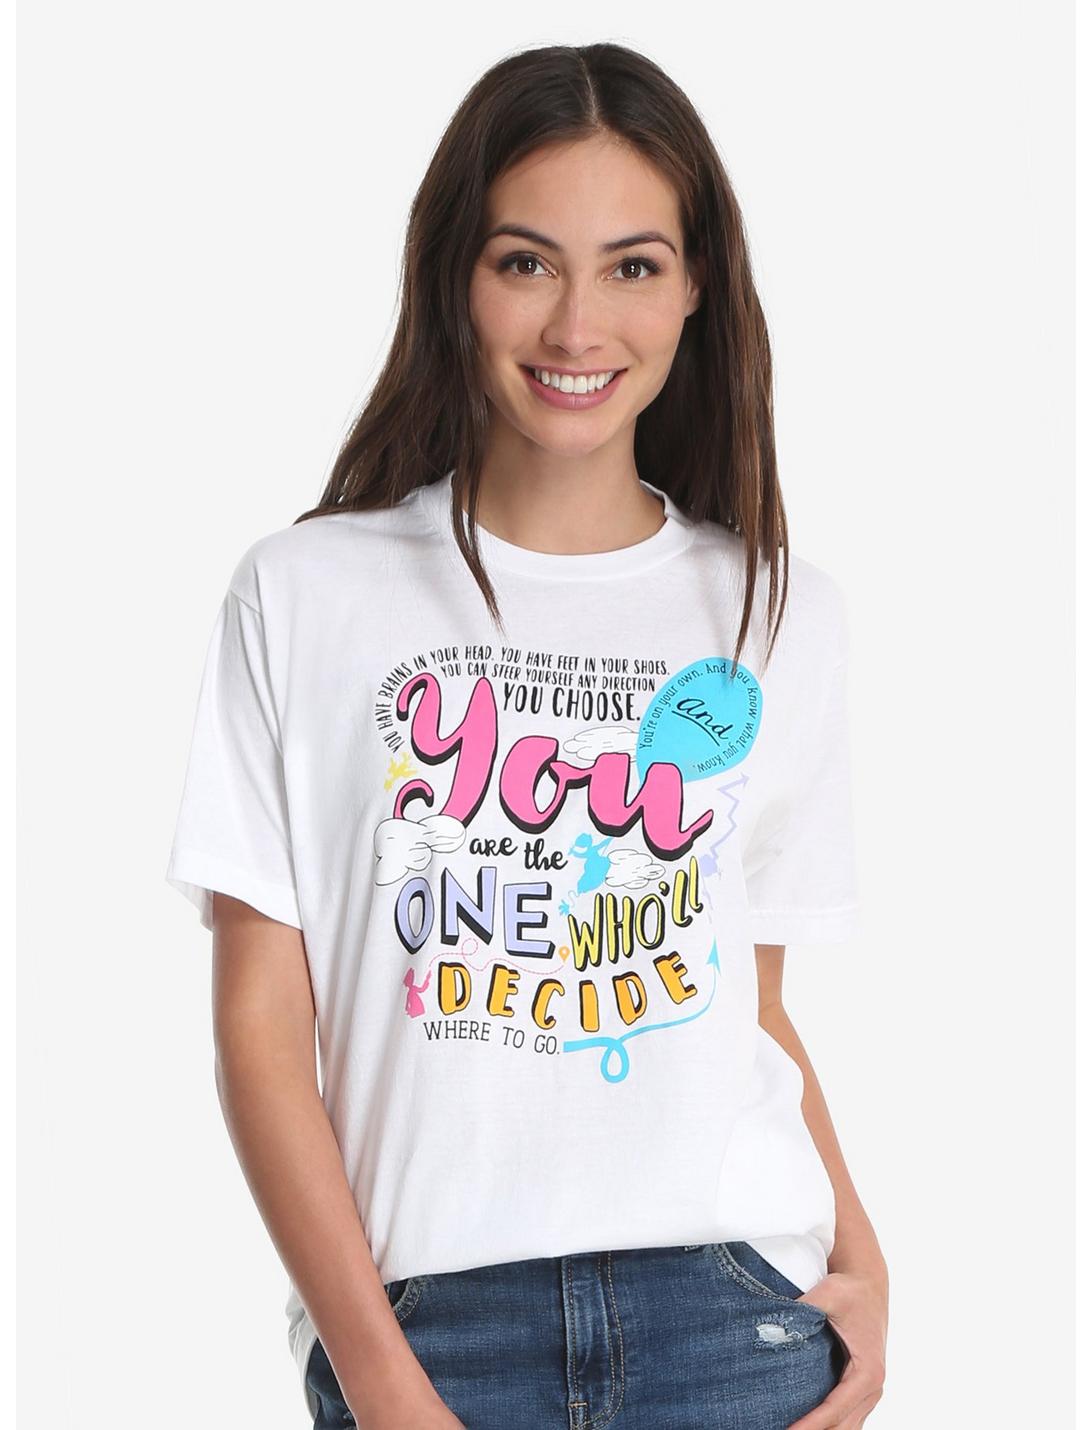 Dr. Seuss Oh, The Places You'll Go! Quote Womens Tee, WHITE, hi-res